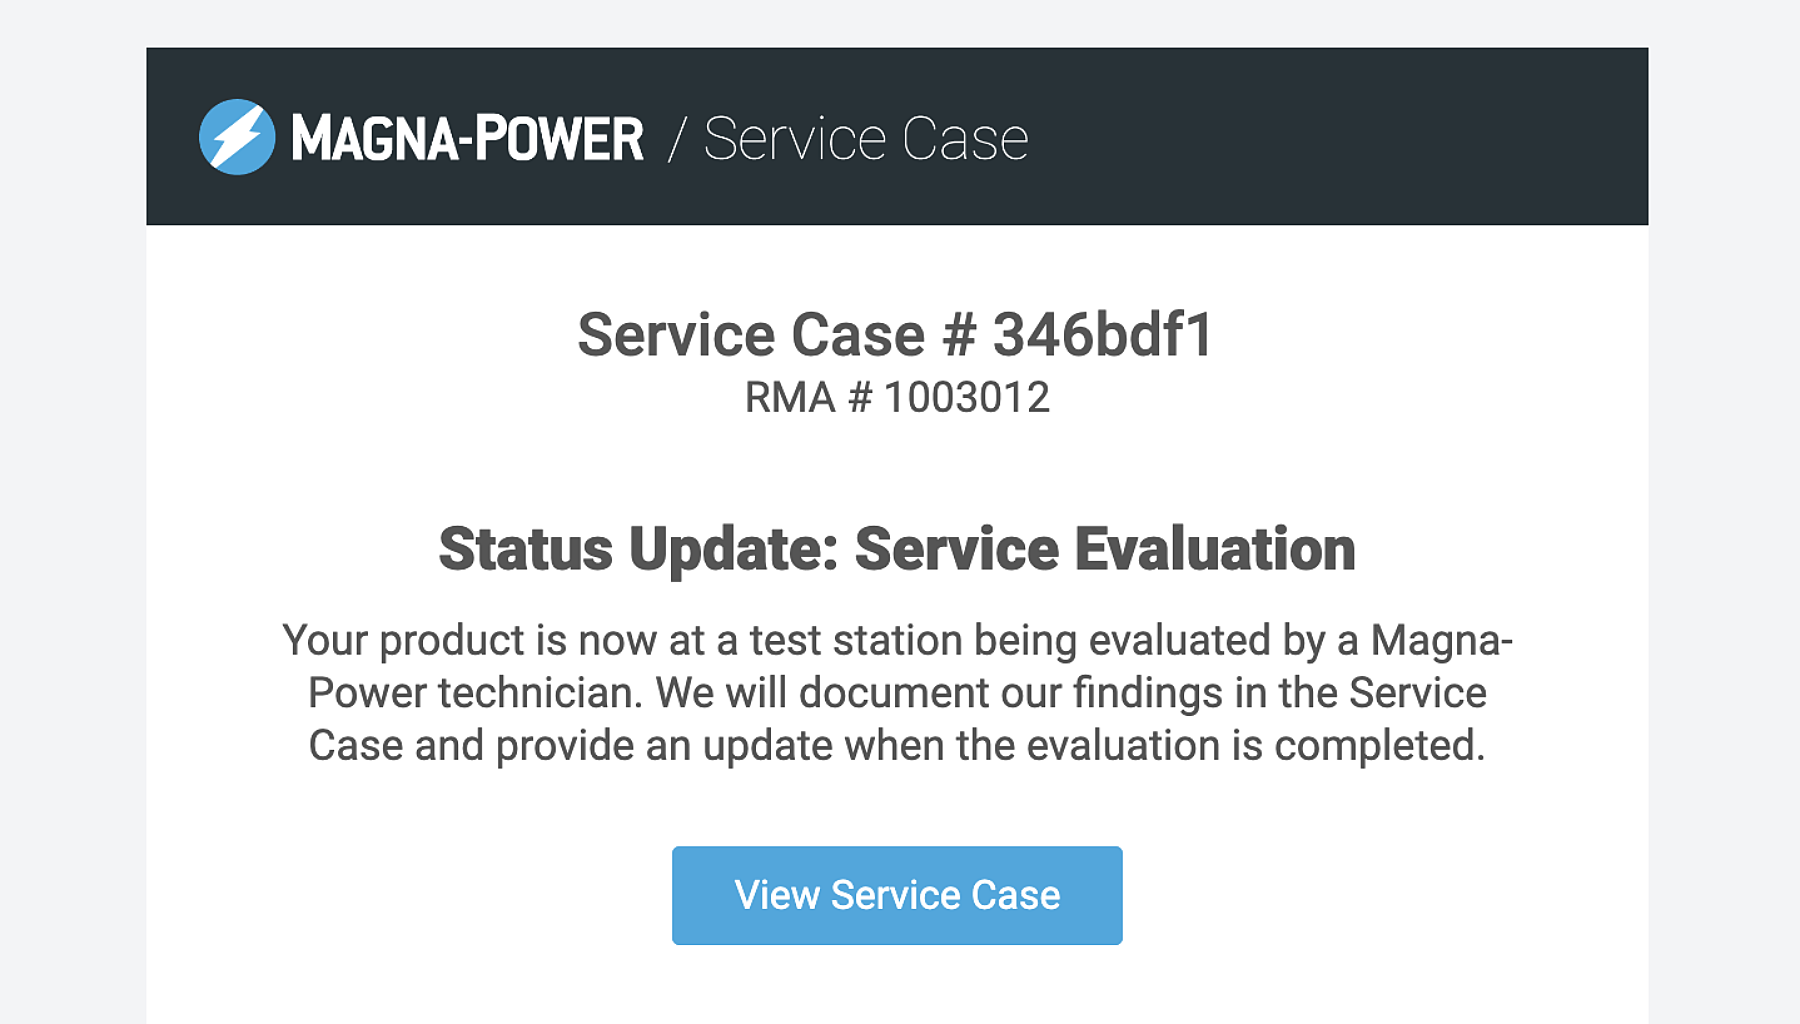 Service Case status email update, triggered by a Magna-Power test technician clocking into an service operation